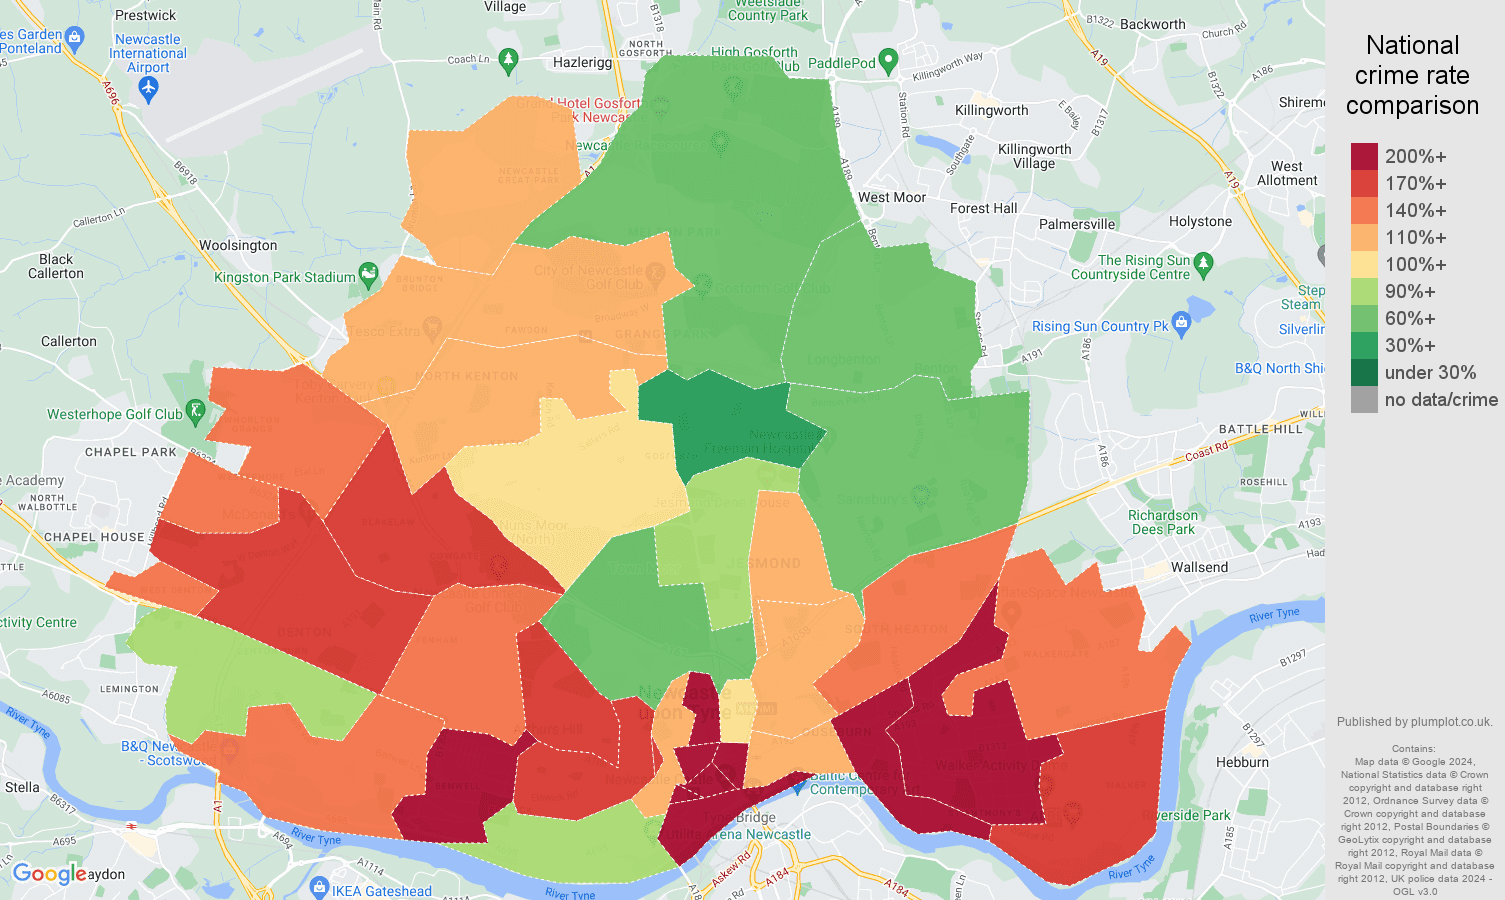 Newcastle upon Tyne crime rate comparison map